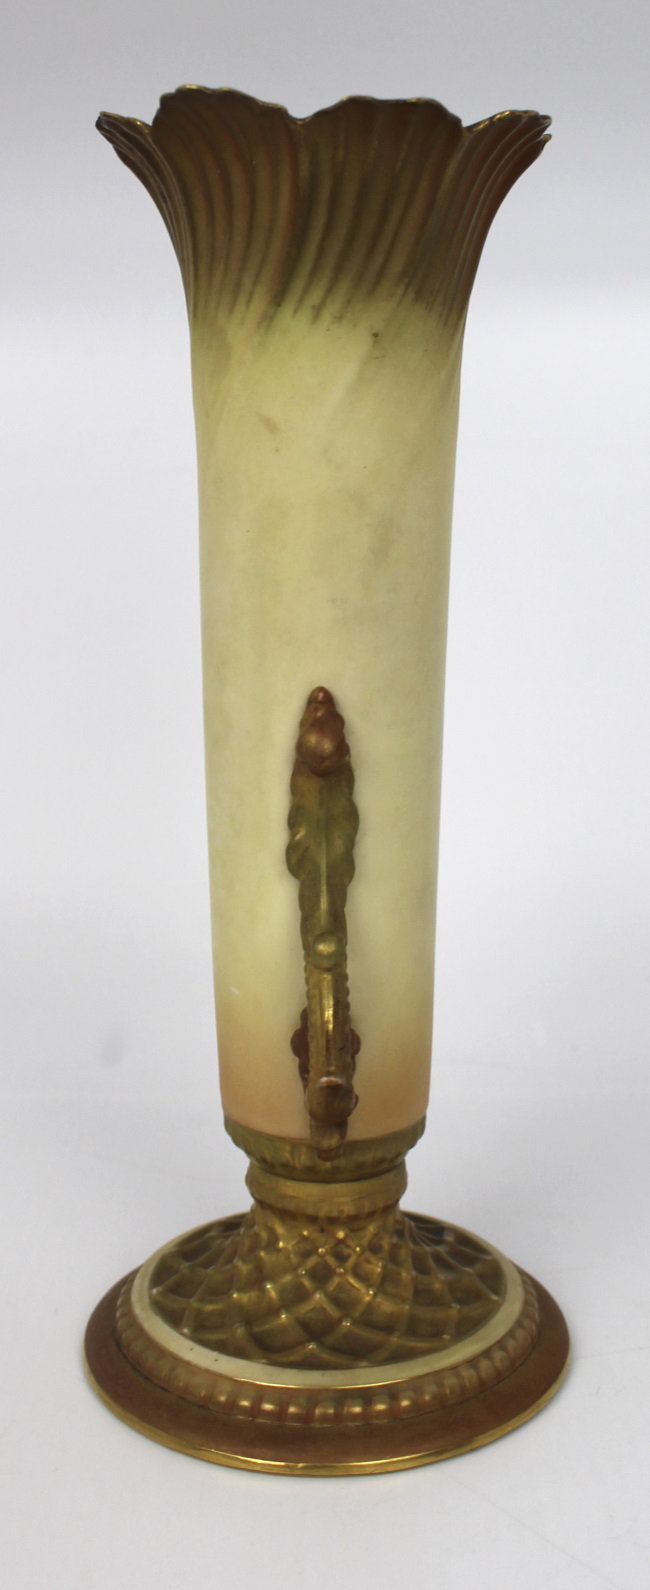 Early 20th c. Royal Worcester Blush Vase - Image 5 of 8